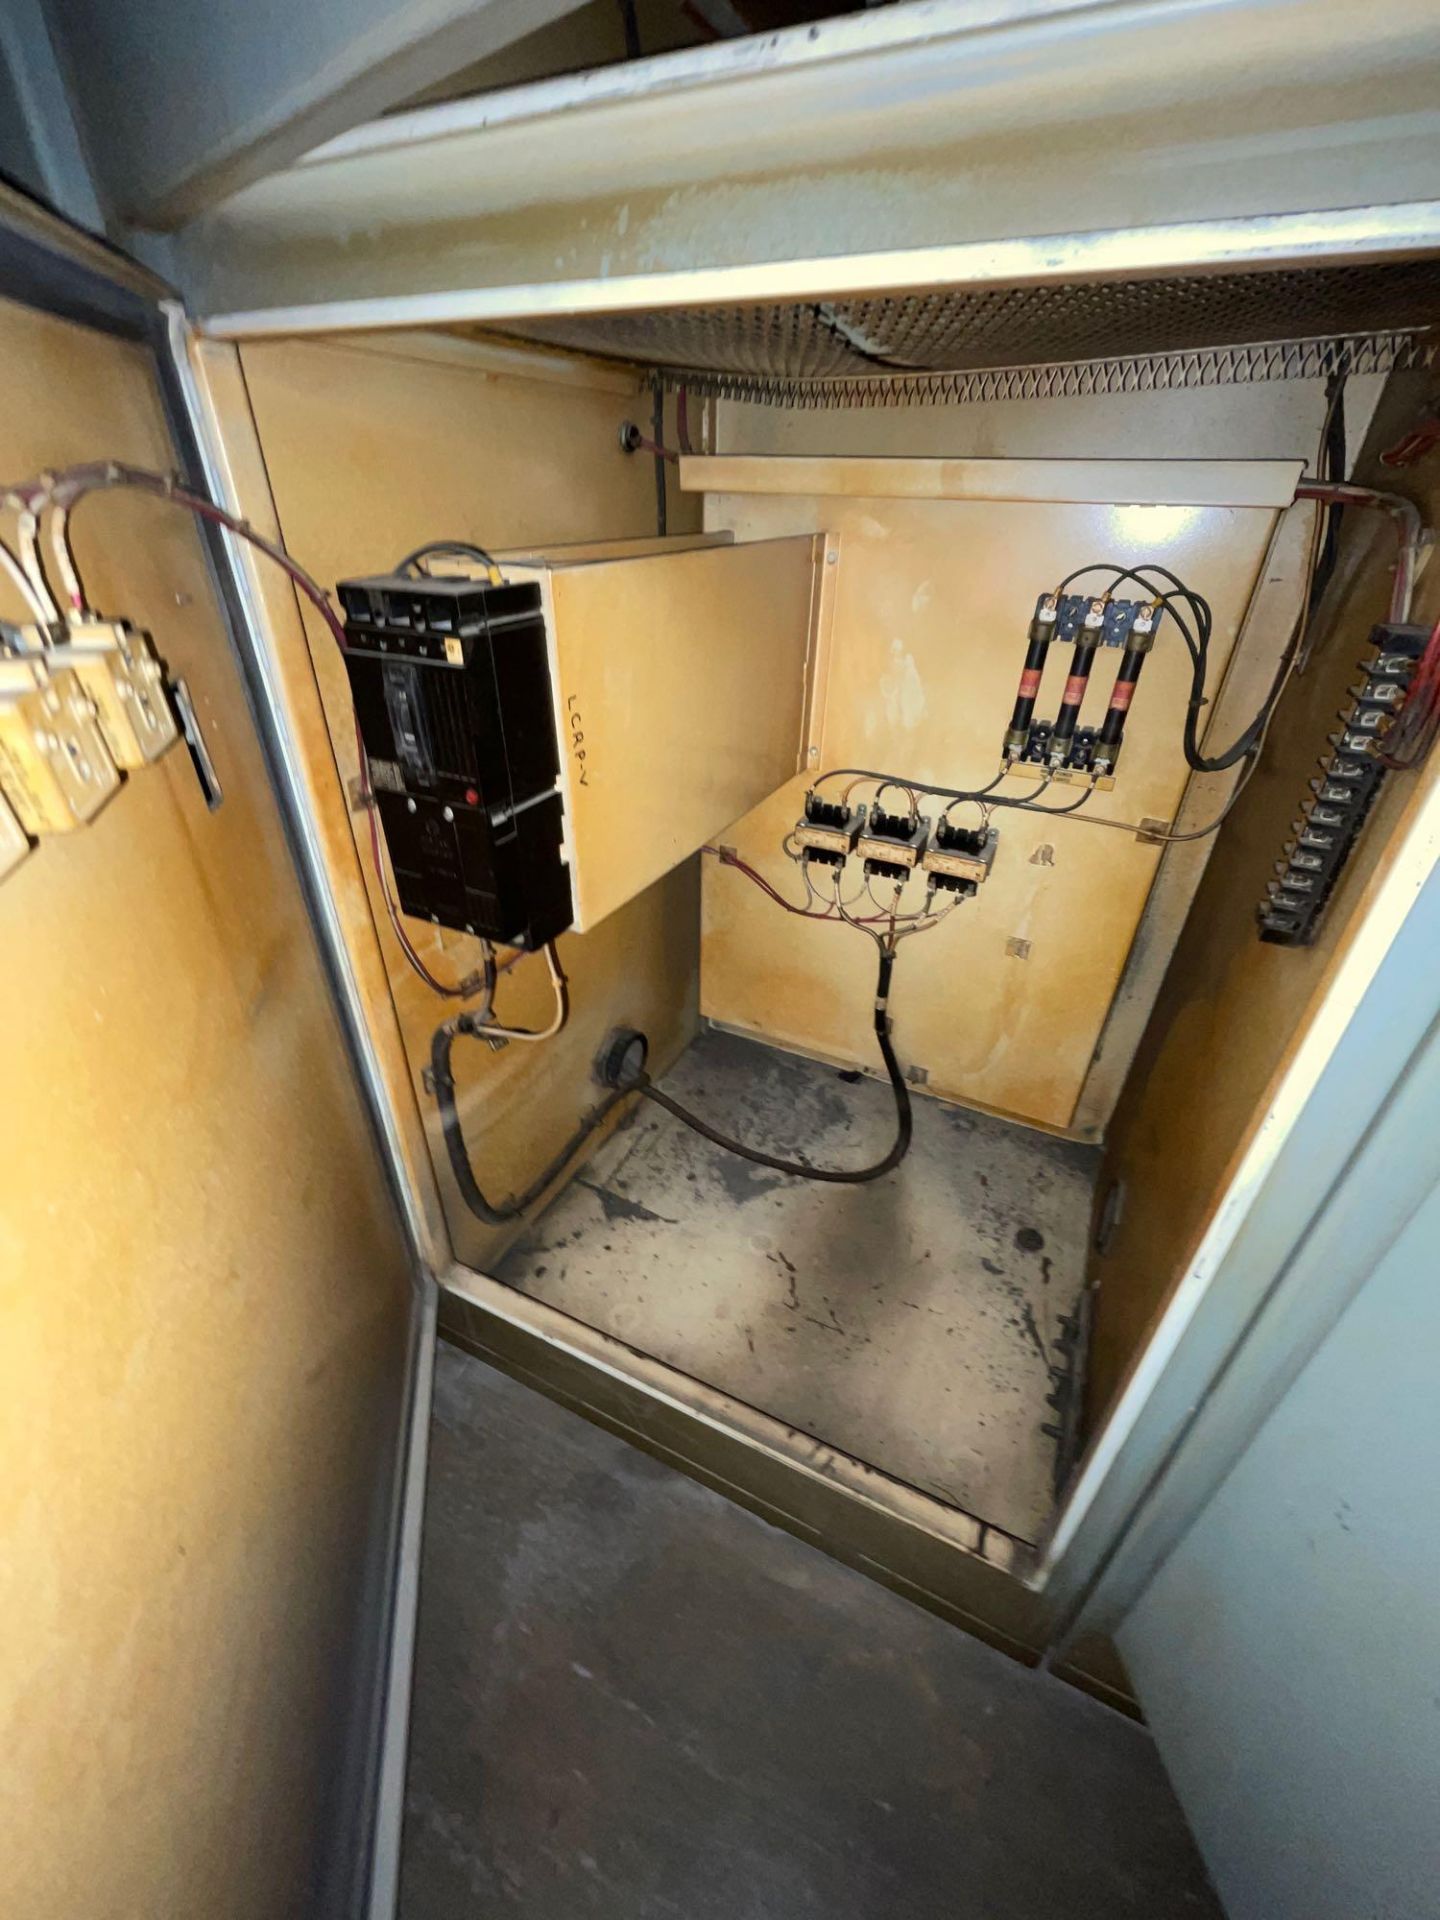 Glass Pane Bending Oven Furnace with Electrical Cabinets - Image 22 of 68